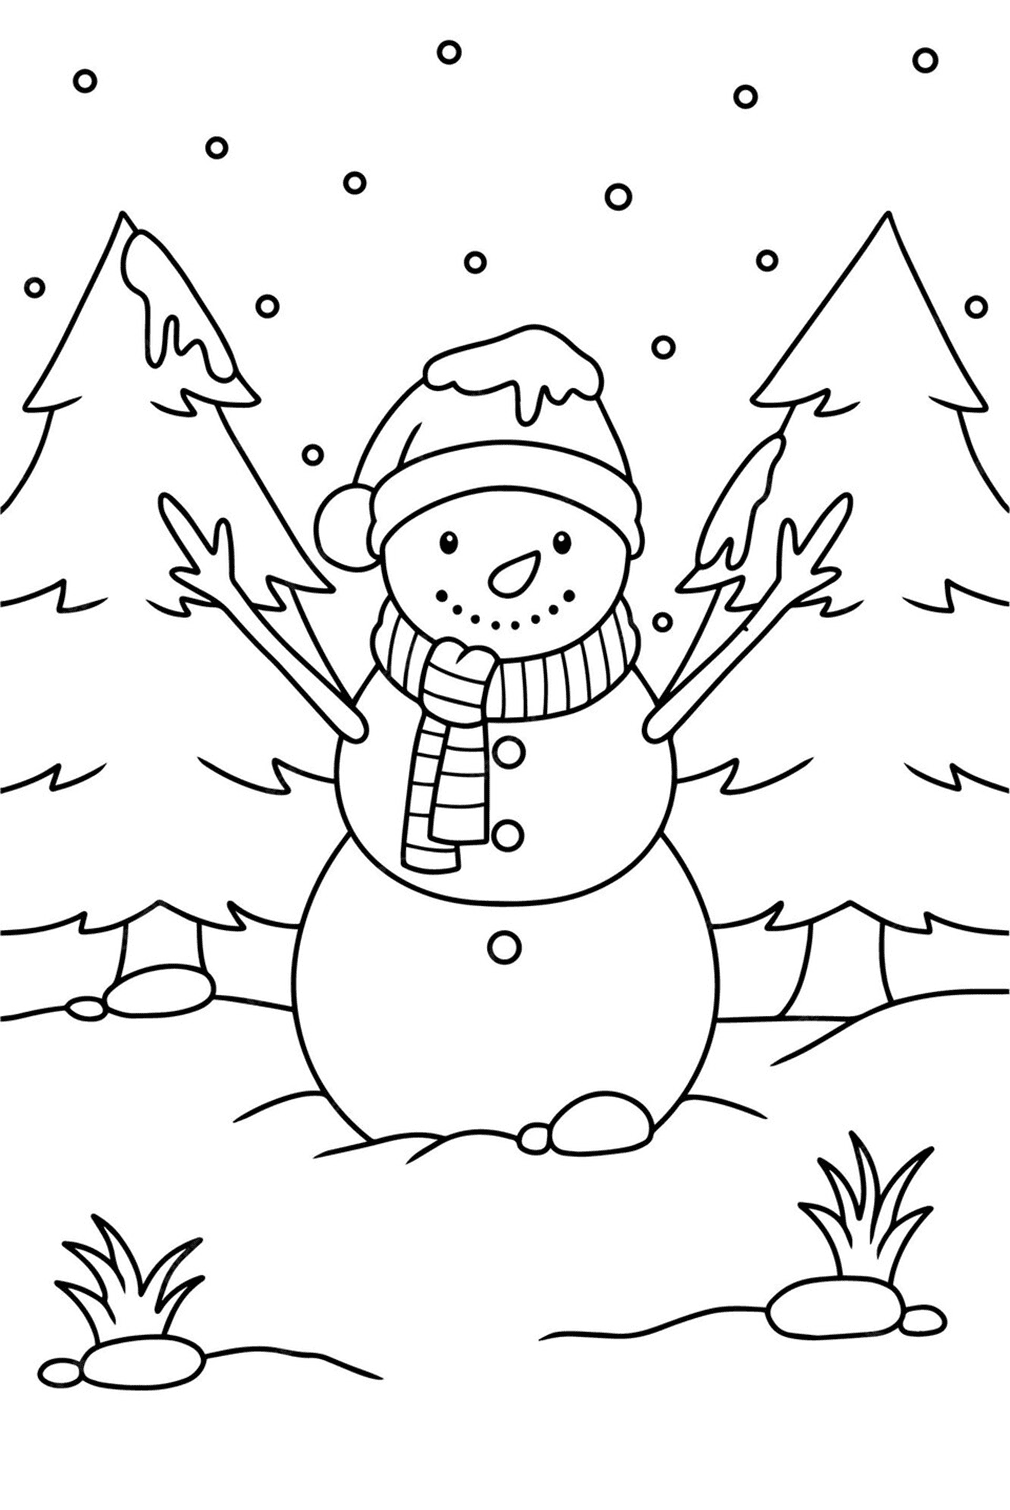 Cute Snowman Coloring Page